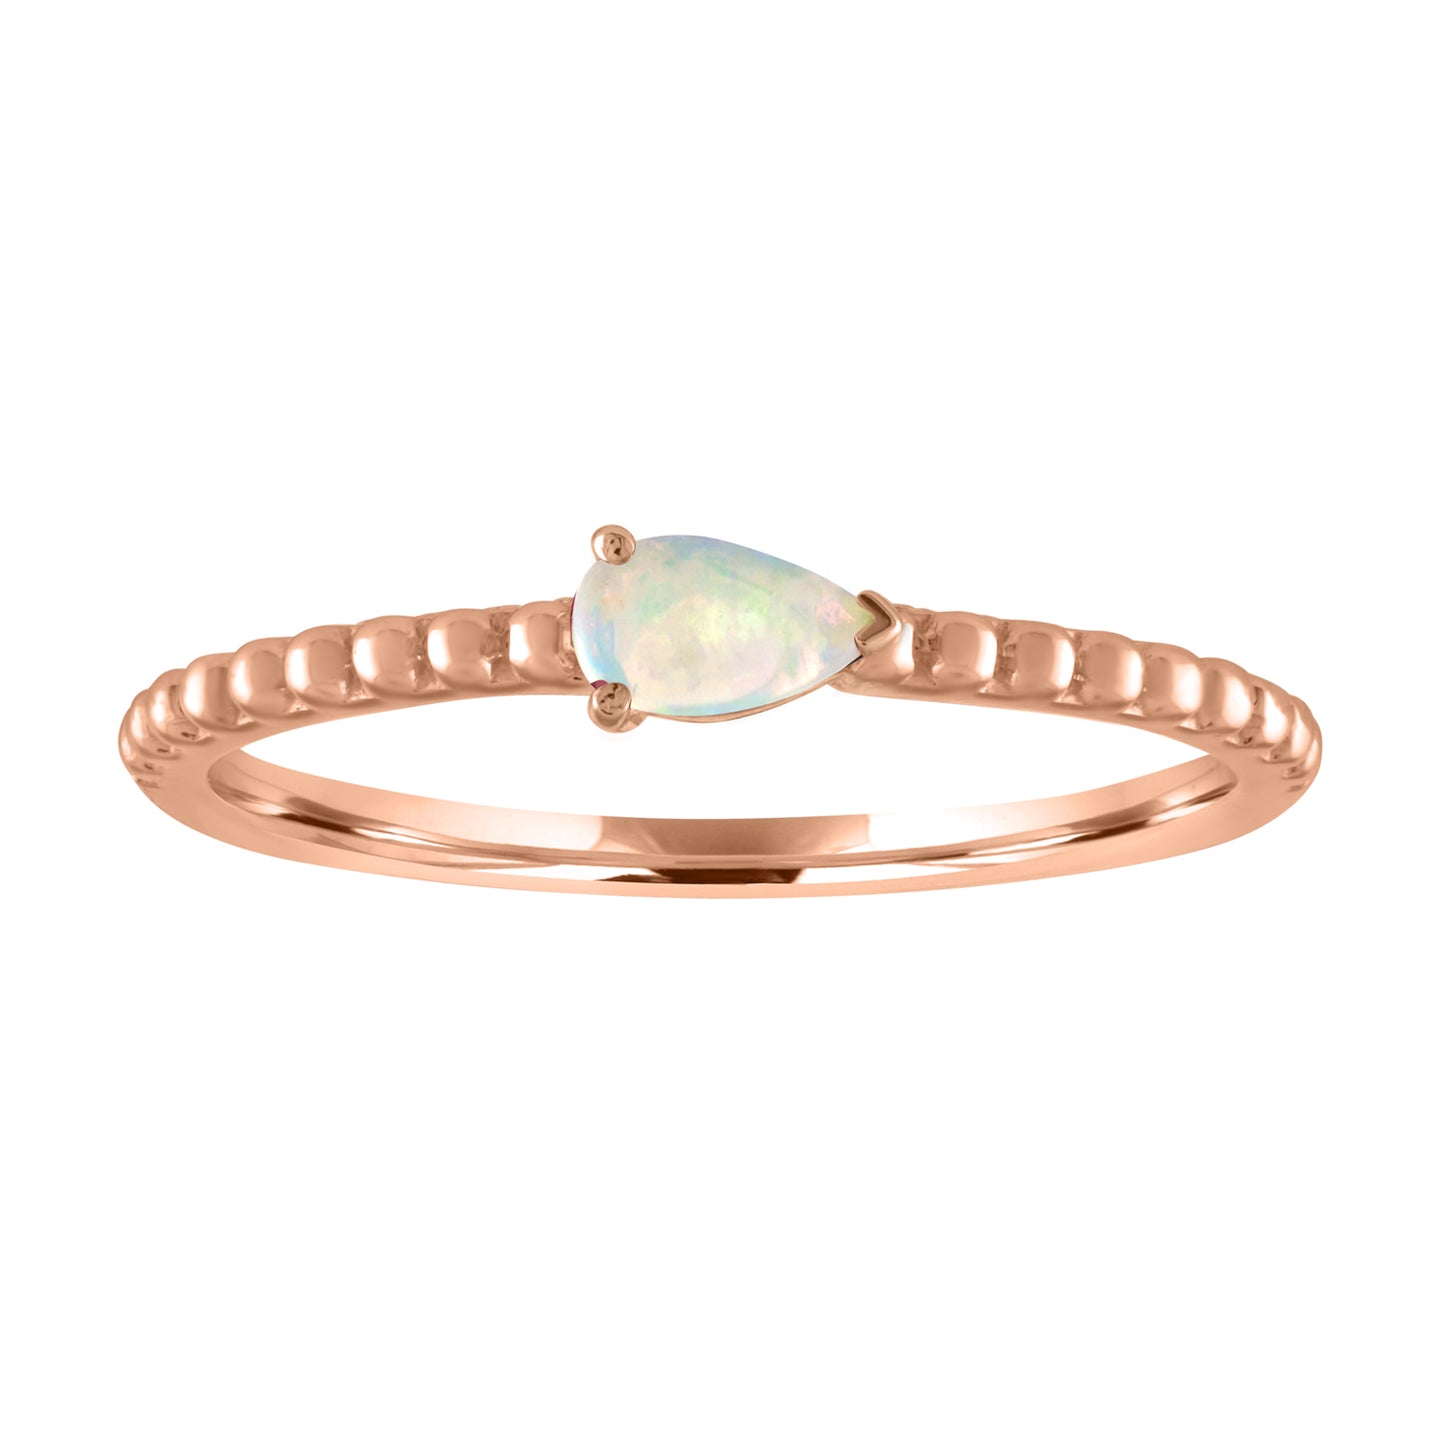 Rose gold beaded skinny band with a pear shaped opal in the center. 